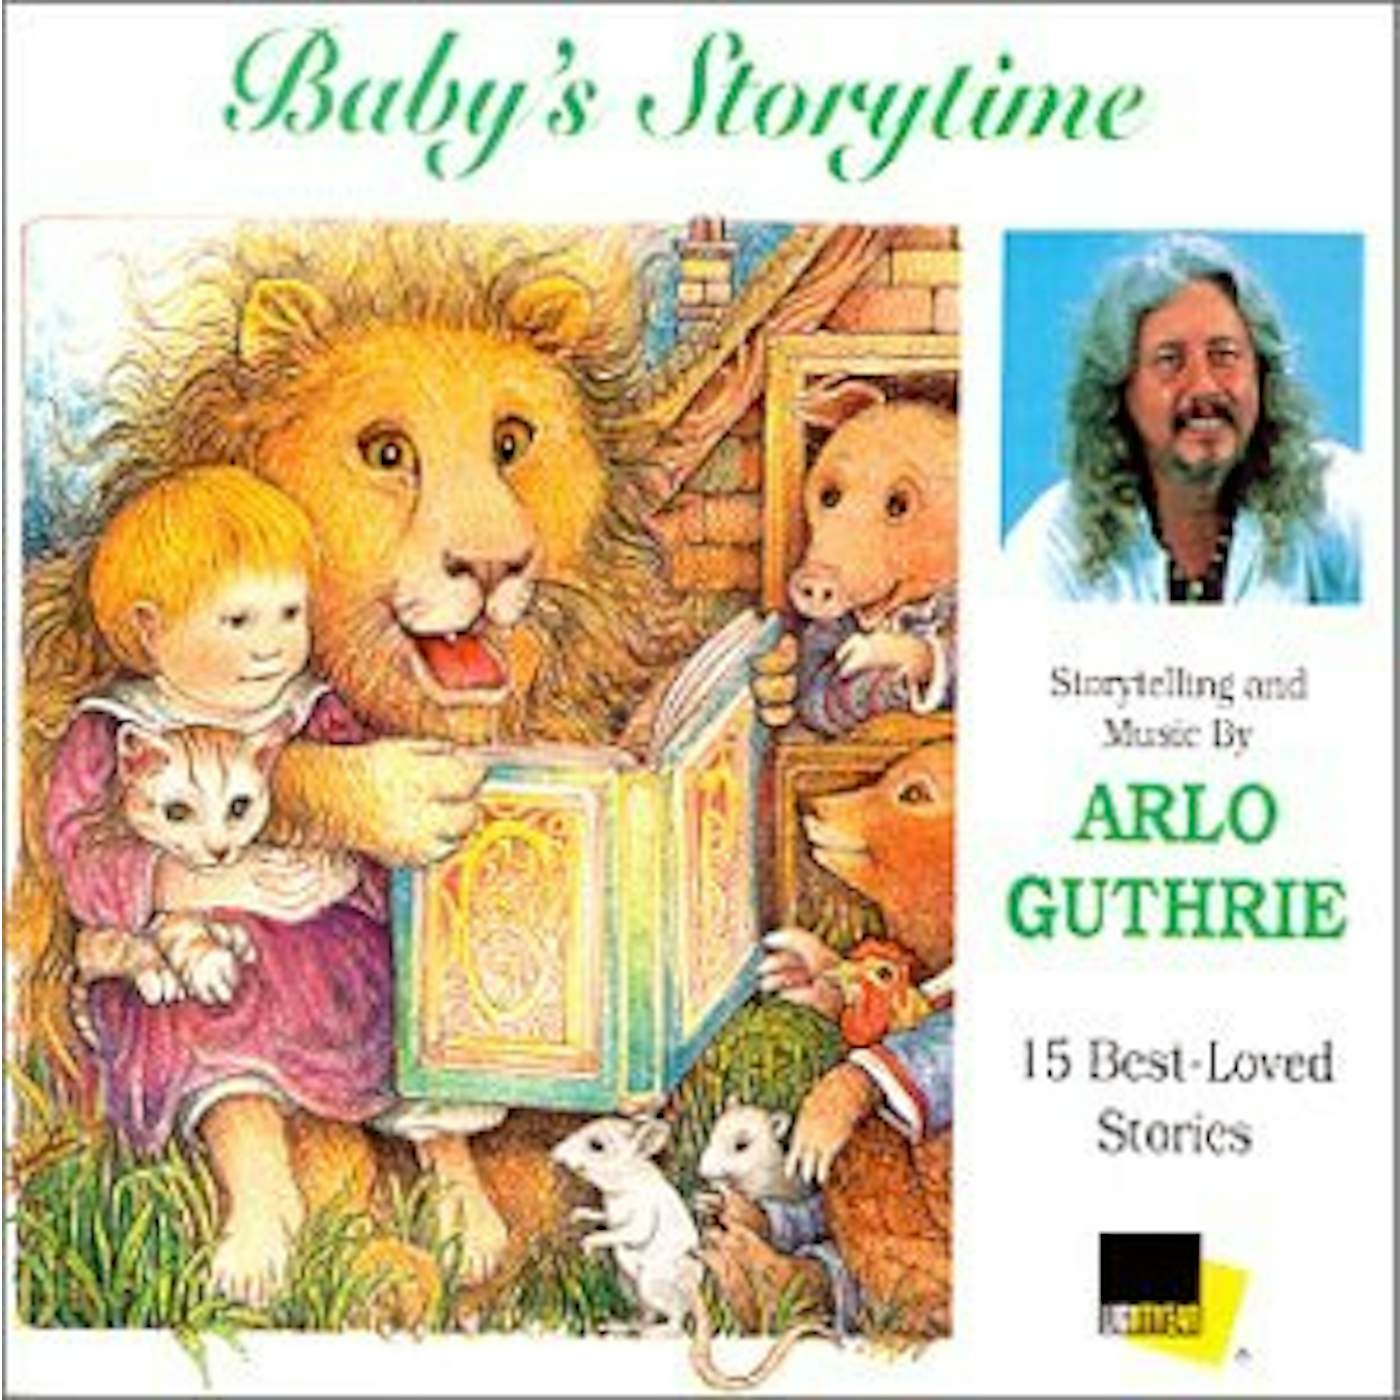 Arlo Guthrie BABY'S STORYTIME CD